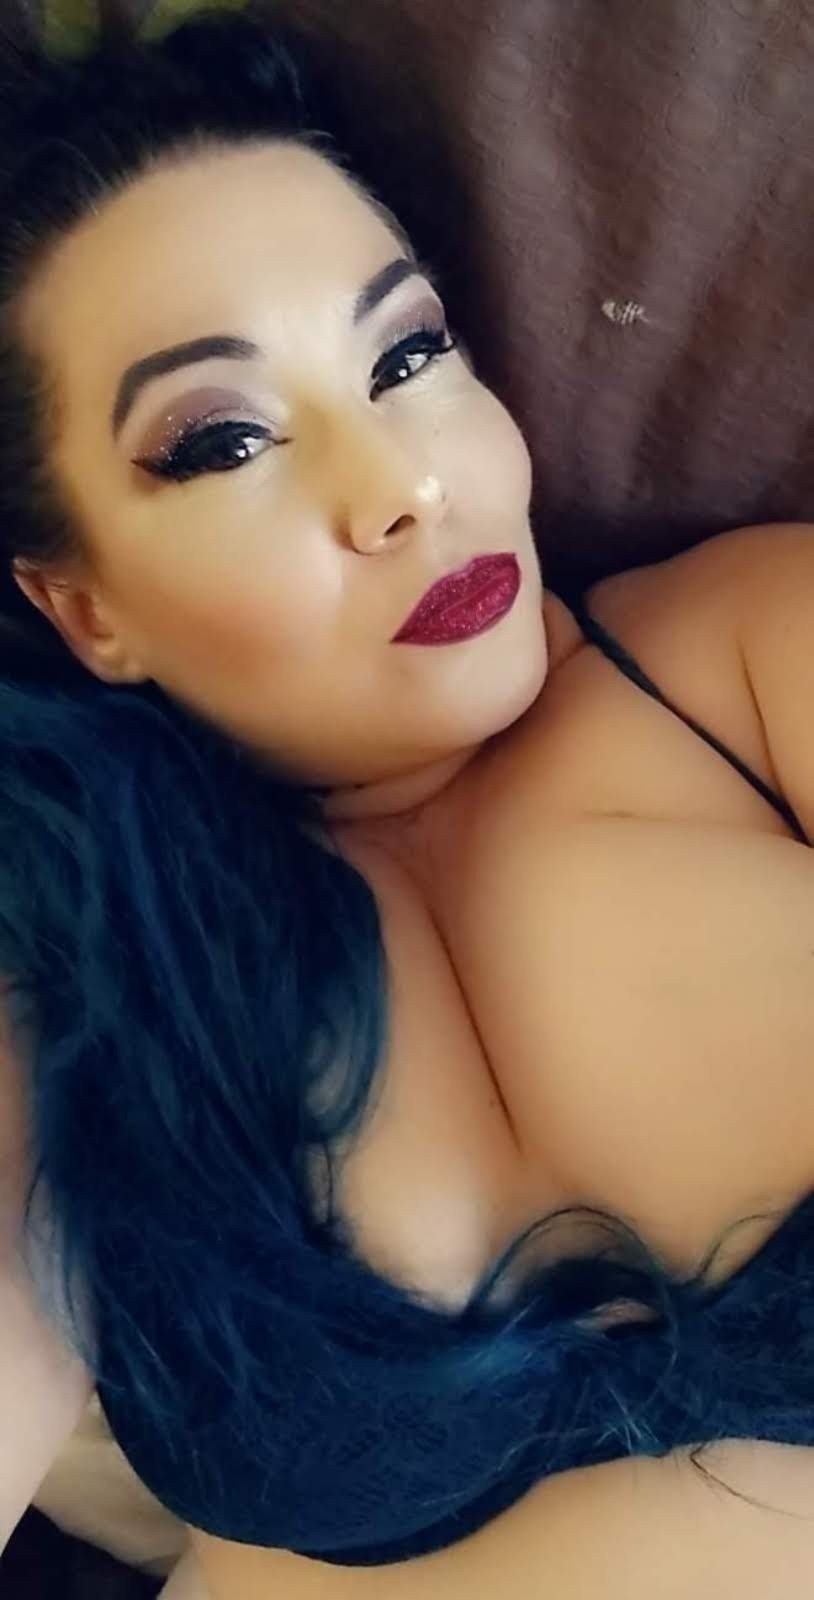 Photo by Miss Arianna with the username @MissArianna, who is a star user,  June 2, 2020 at 4:09 PM. The post is about the topic Sexy BBWs and the text says 'COME FIND OUT!   http://missarianna.tumblr.com  /https://onlyfans.com/miss-arianna http://www.xvideos.com/video46082731/verification_video.   🐦@MissArianna10'